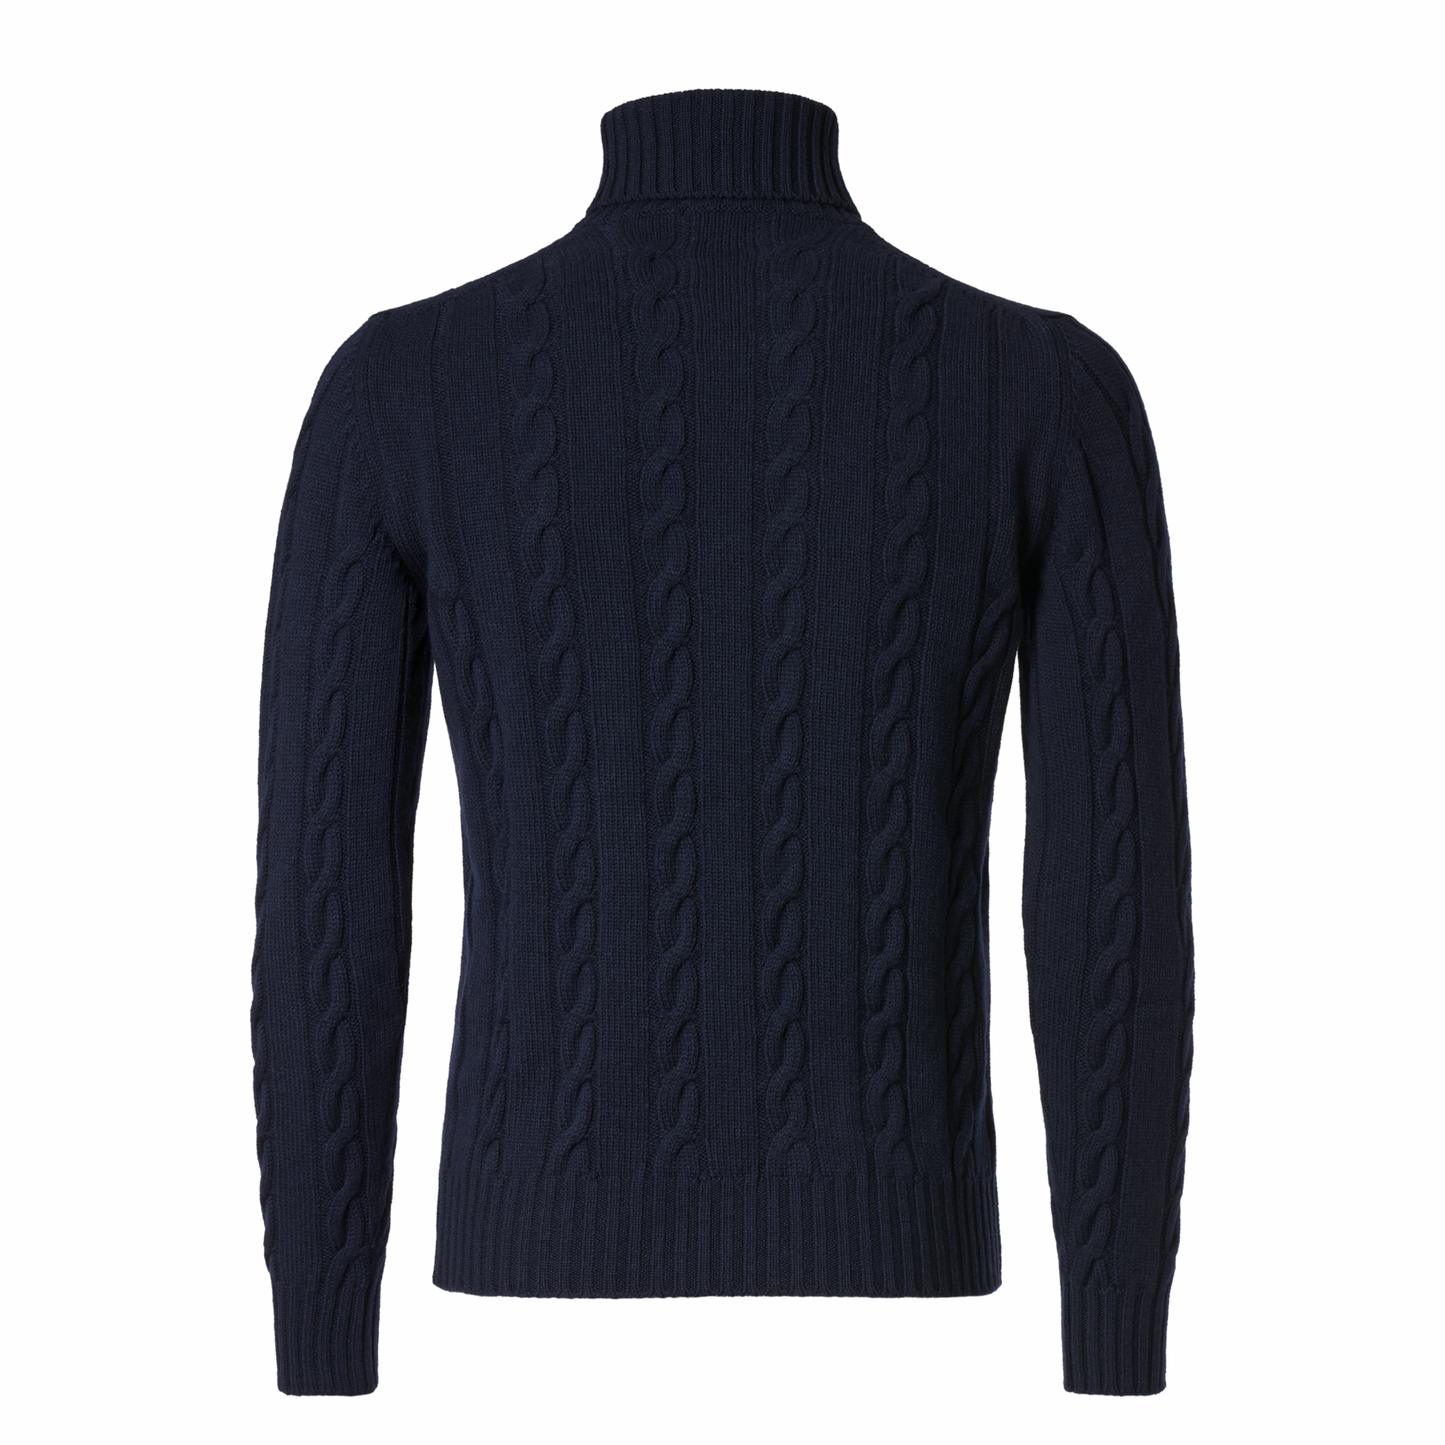 Luciano Barbera Turtleneck Cable-Knit Wool, Silk and Cashmere-Blend Sweater in Navy Blue - SARTALE